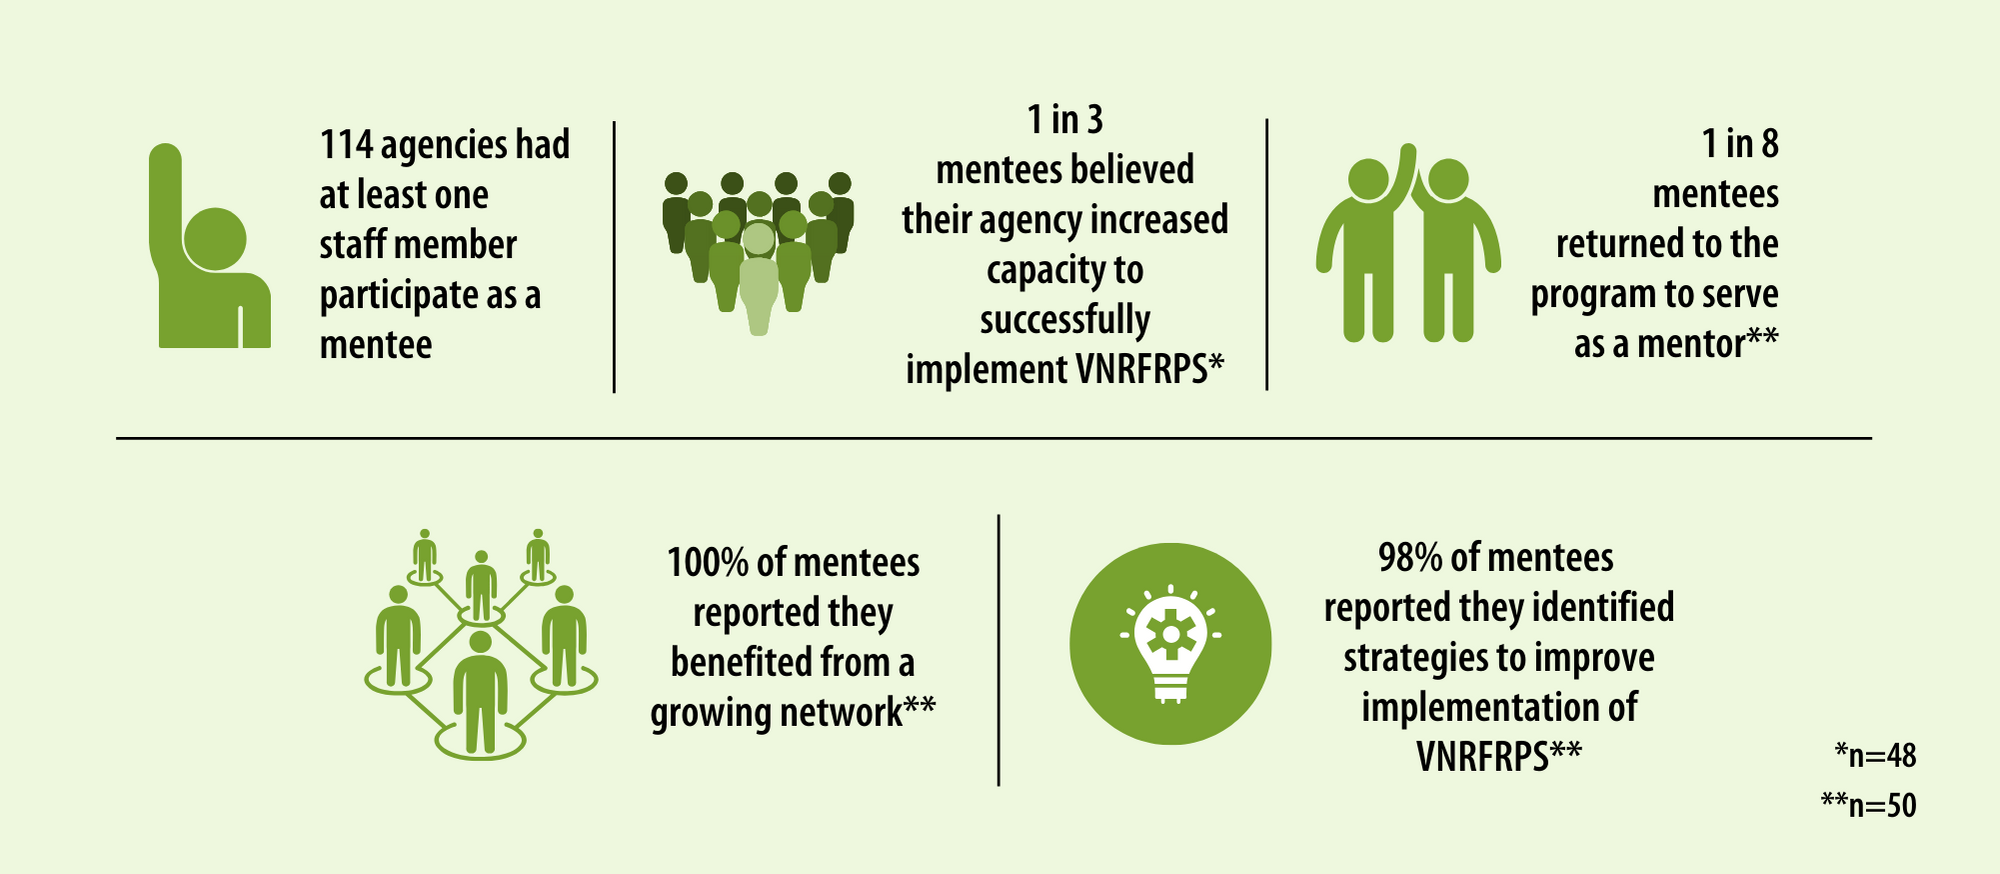 5 Reasons to Apply for Mentorship